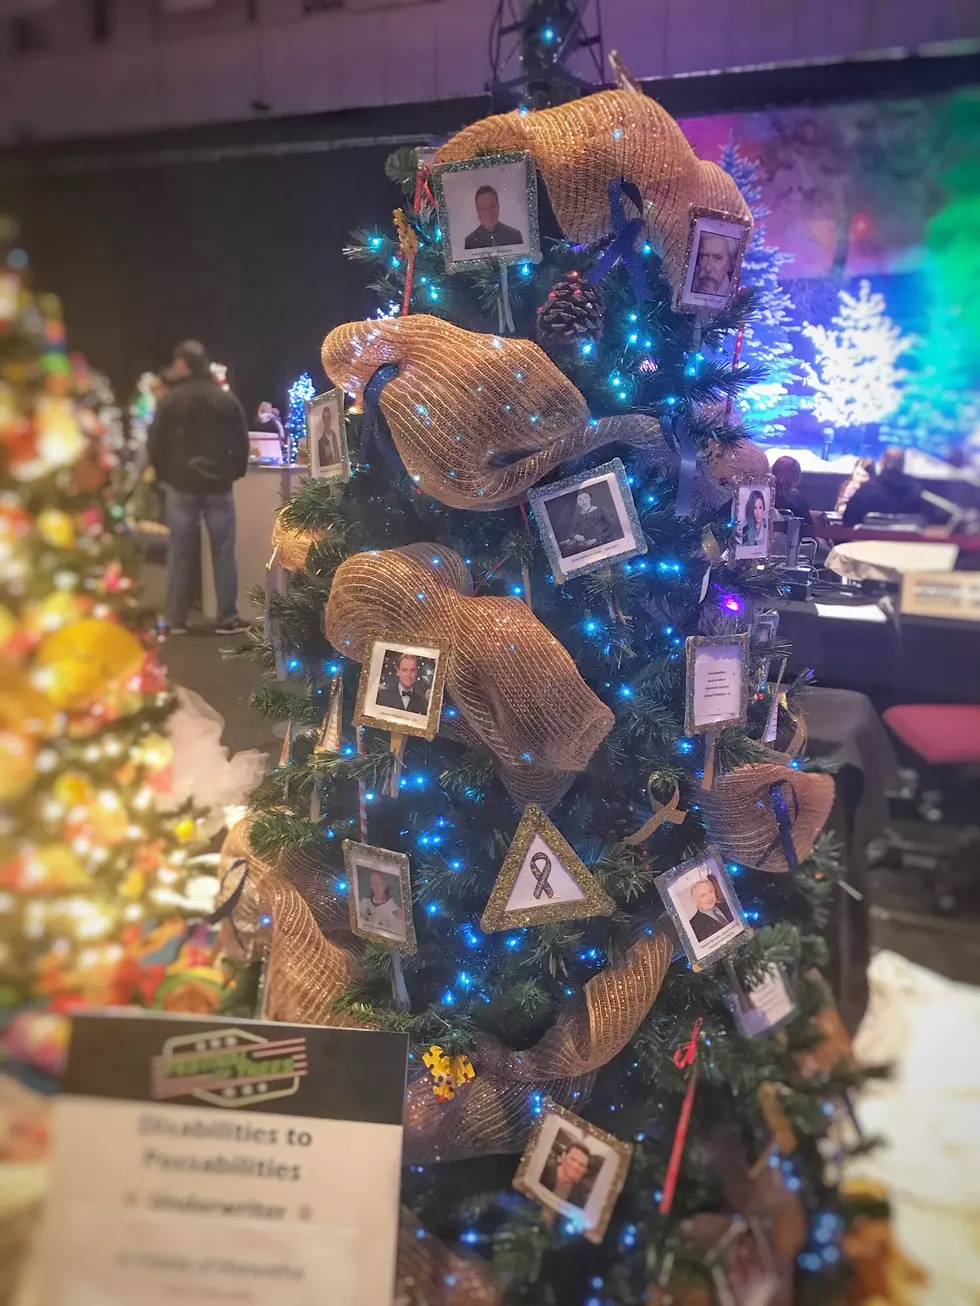 The Most Important Christmas Tree At ‘Festival Of Trees’